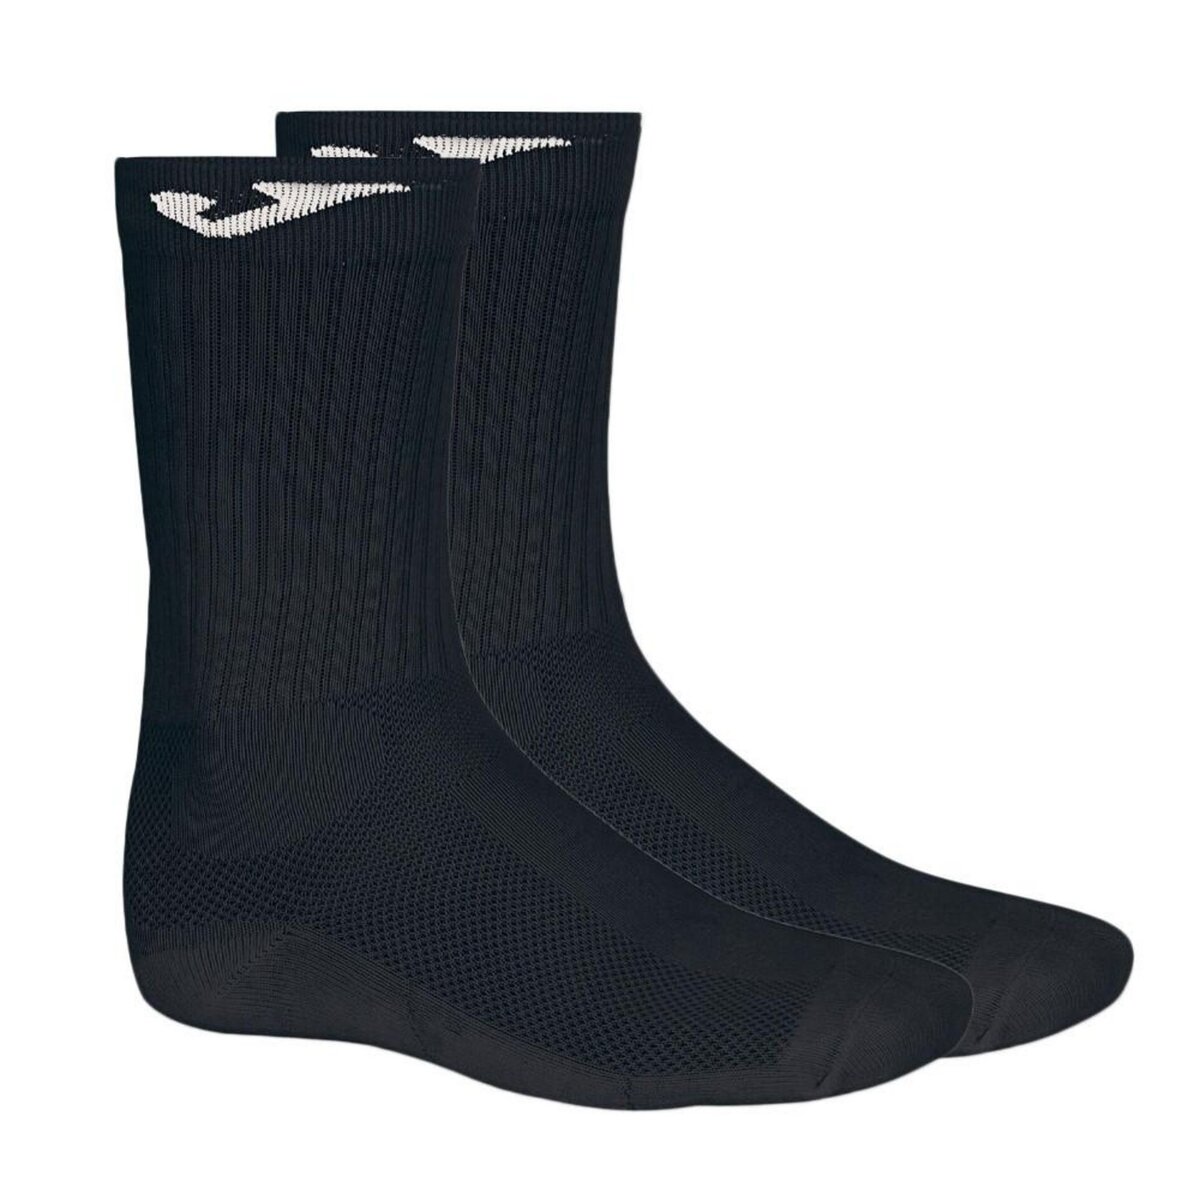 JOMA Chaussettes Noires Homme Joma 400032